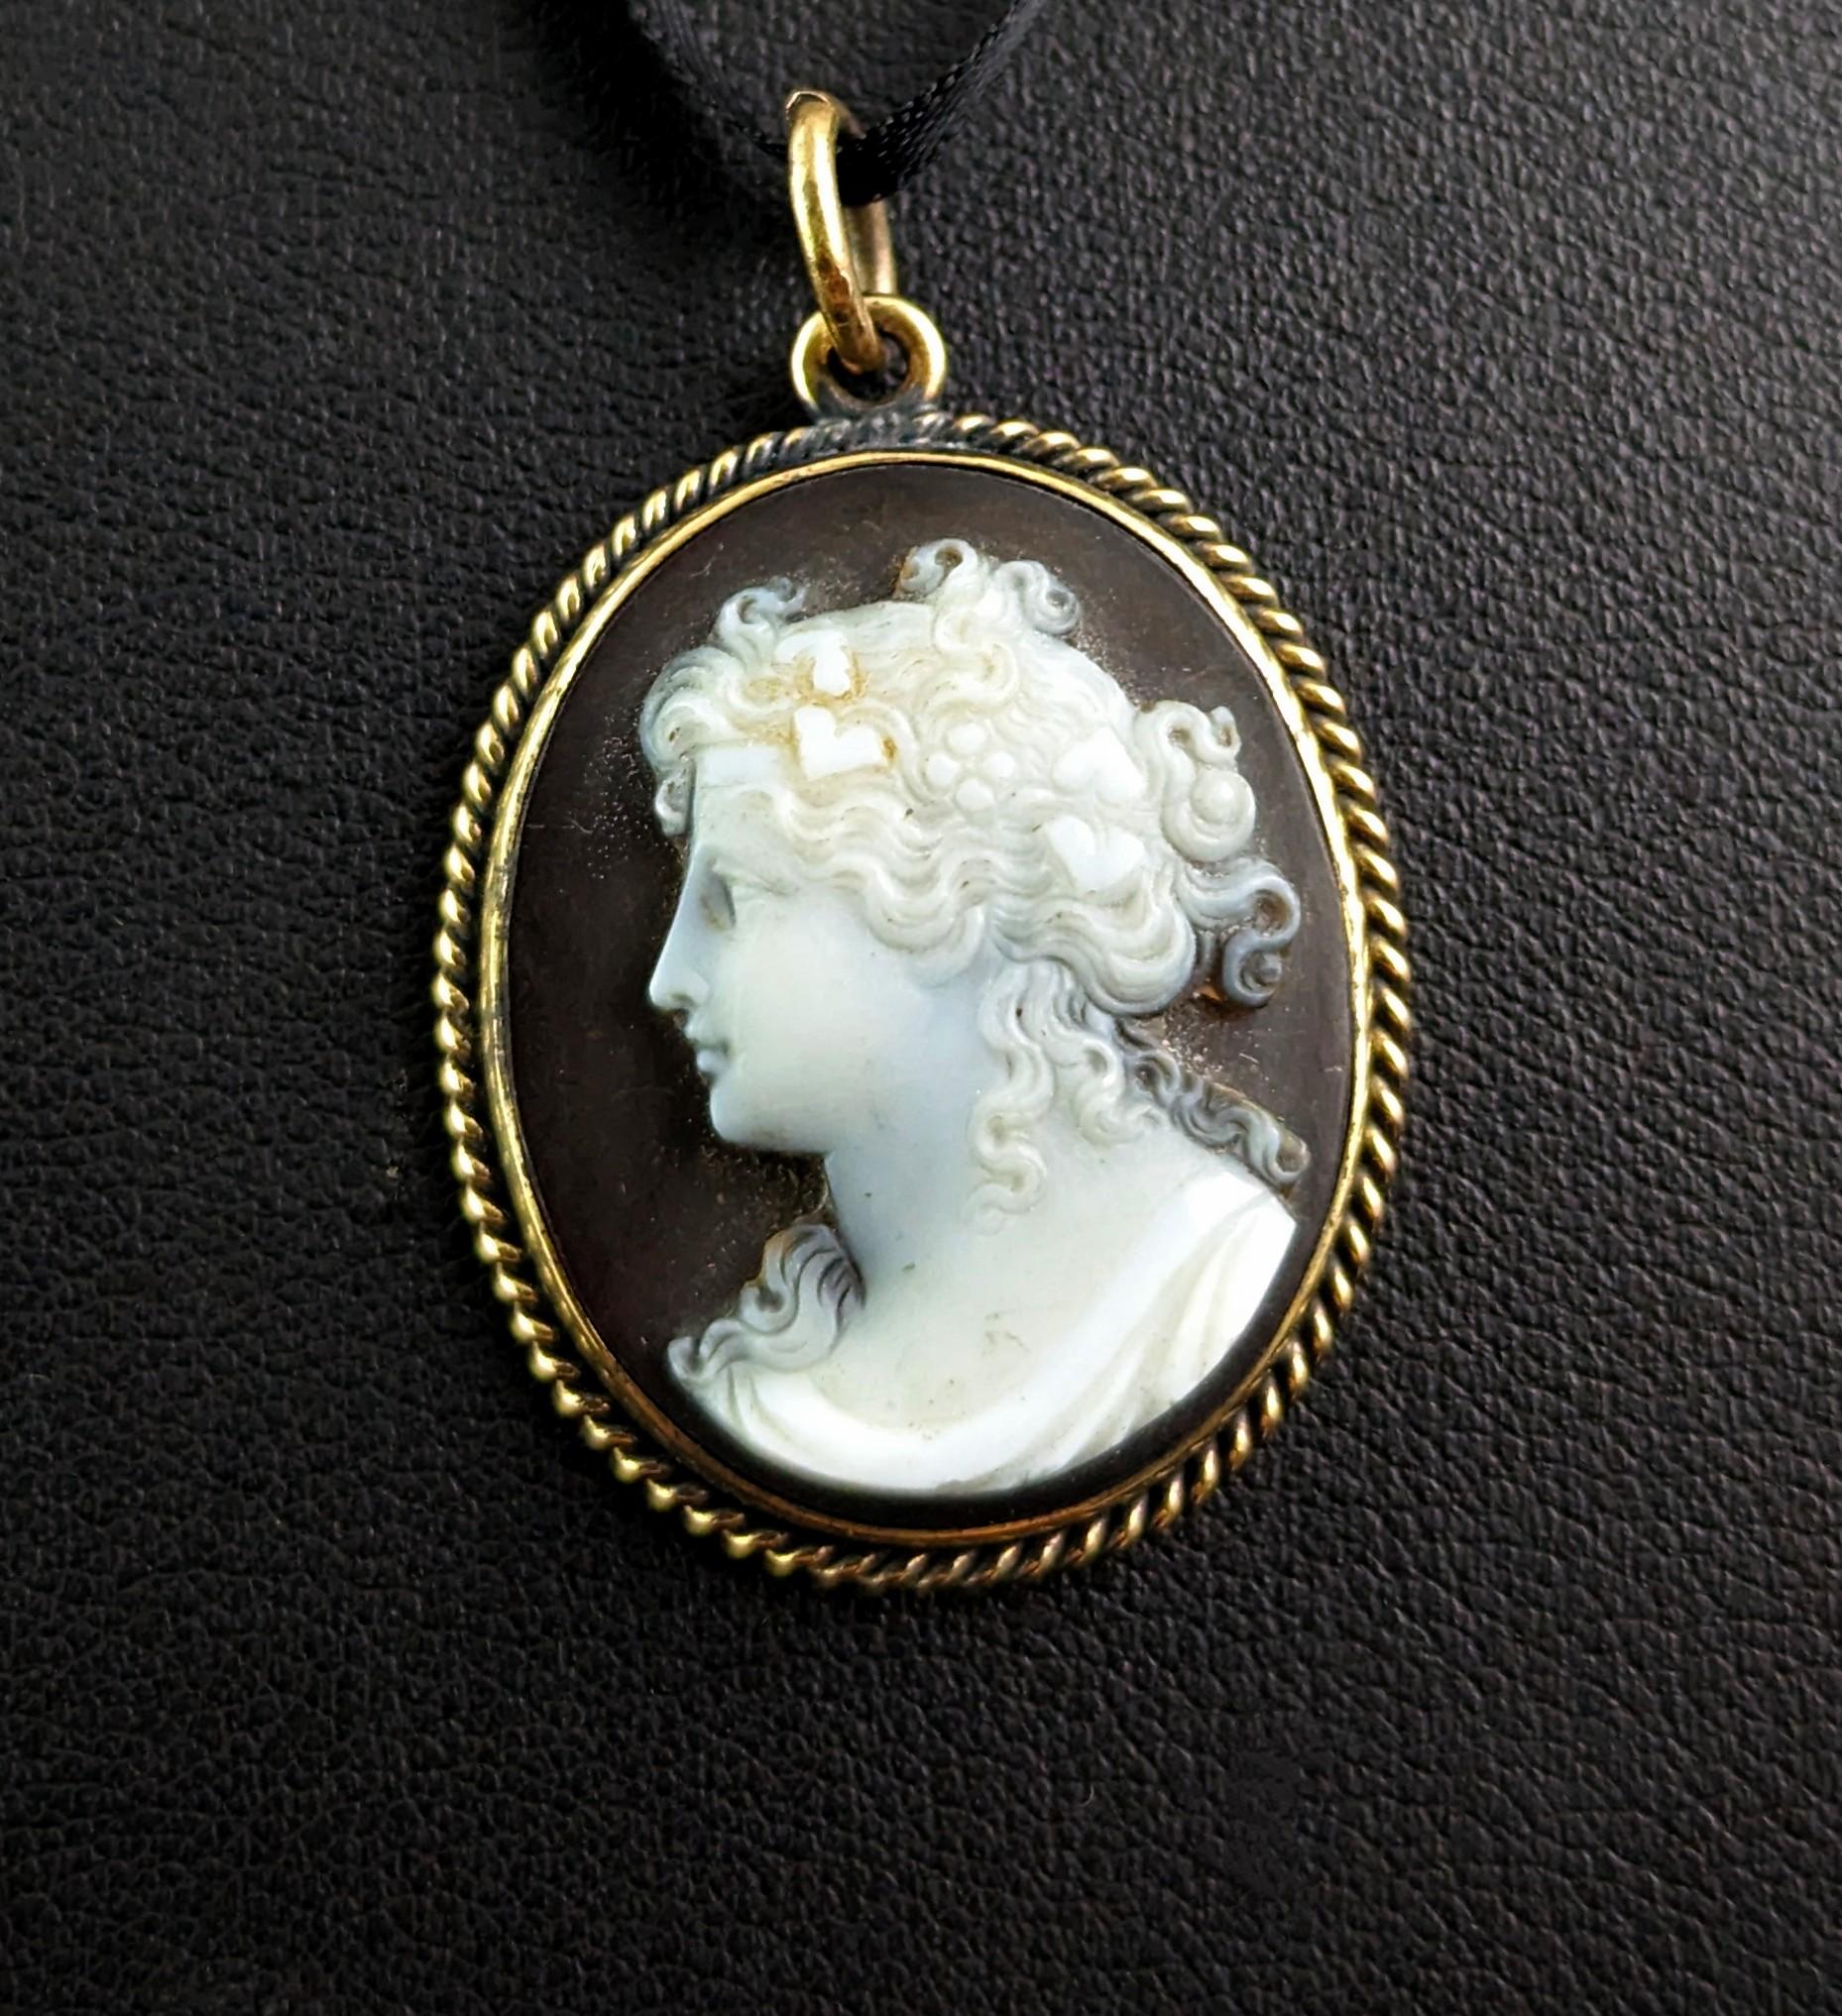 A fine antique Victorian agate cameo pendant.

This wonderfully crafted beauty has been hand carved from layers of agate, the base a rich dark red and the carving in an off white shade.

The cameo features a classic lady facing to the left with